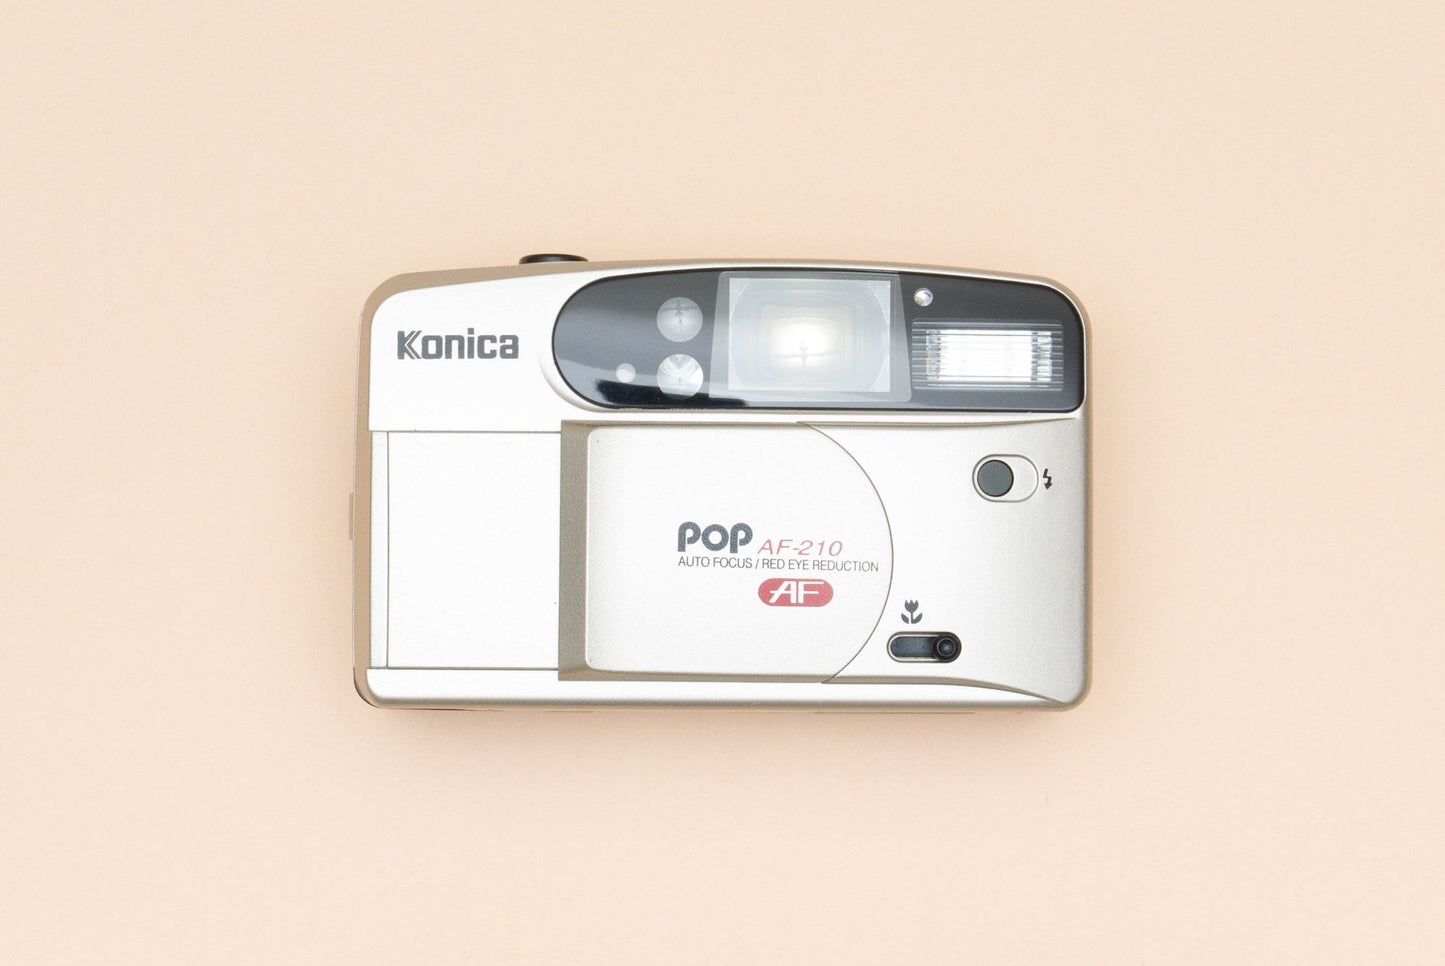 Konica POP AF-210 Compact 35mm Point and Shoot Film Camera